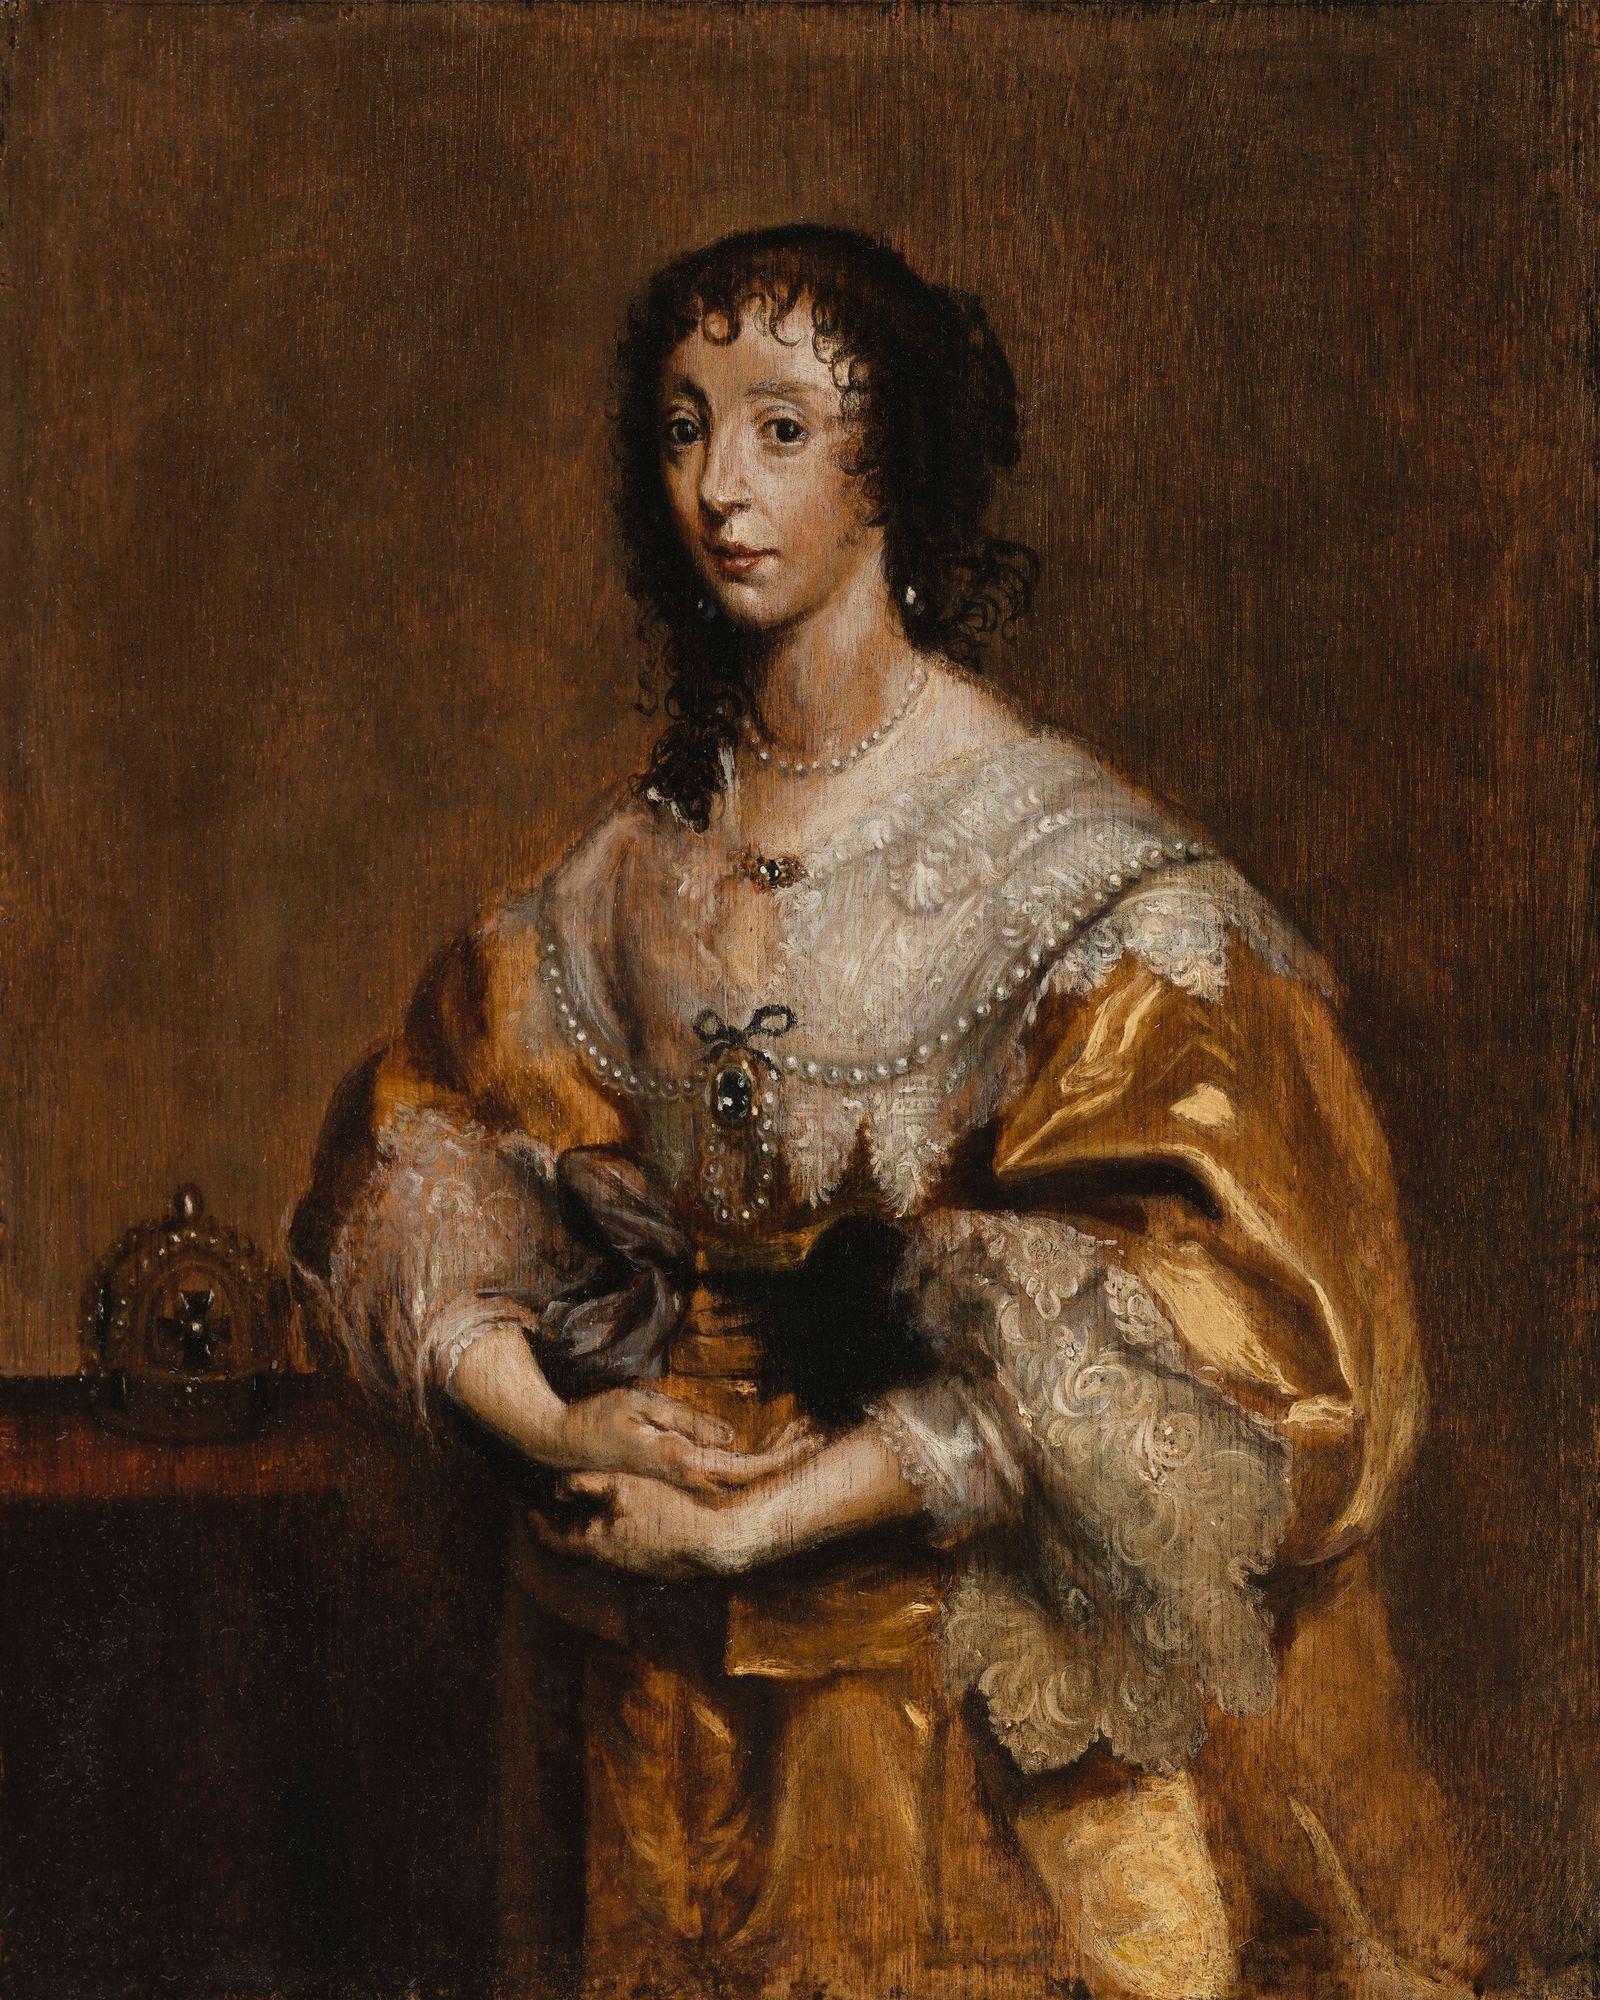 Oil on panel

This spontaneously painted oil sketch is related to Van Dyck's "Portrait of Queen Mary Henrietta" (now in a private collection in New York), which the master painted for Cardinal Barberini in 1636-1637 (see S Barnes, N. Depoorter, H.